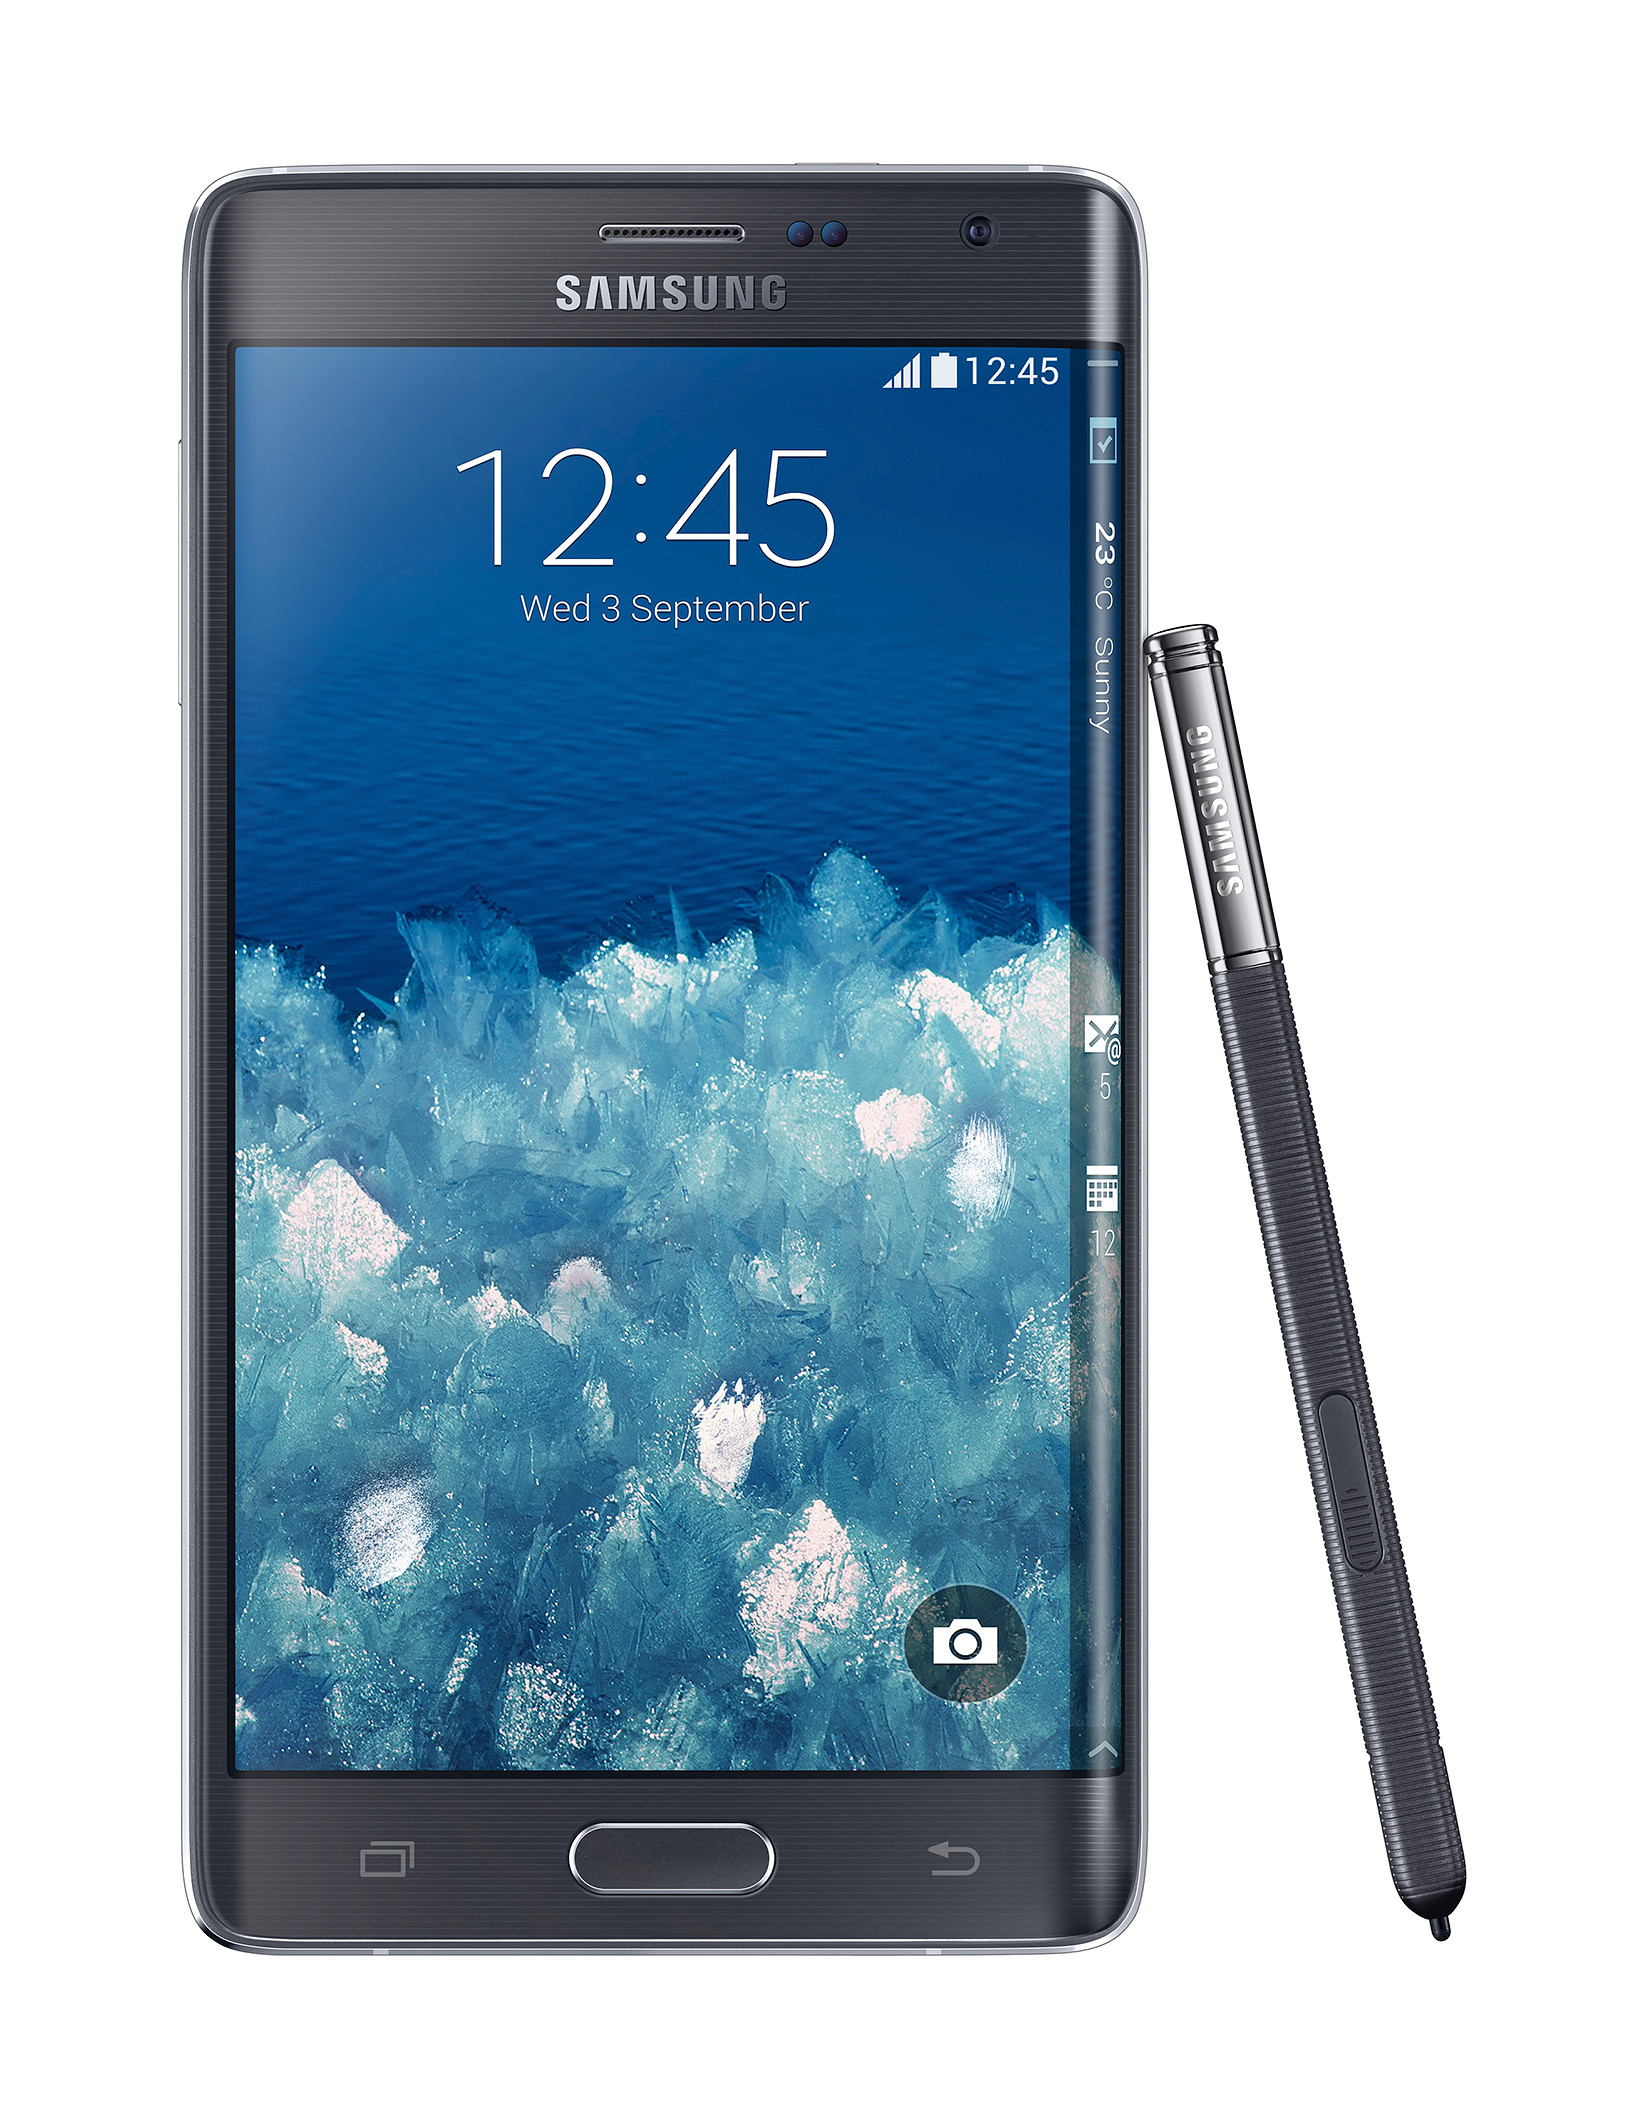 1409752977_a-phone-with-an-edge-samsung-galaxy-note-edge-with-curved-screen-is-official-22.jpg